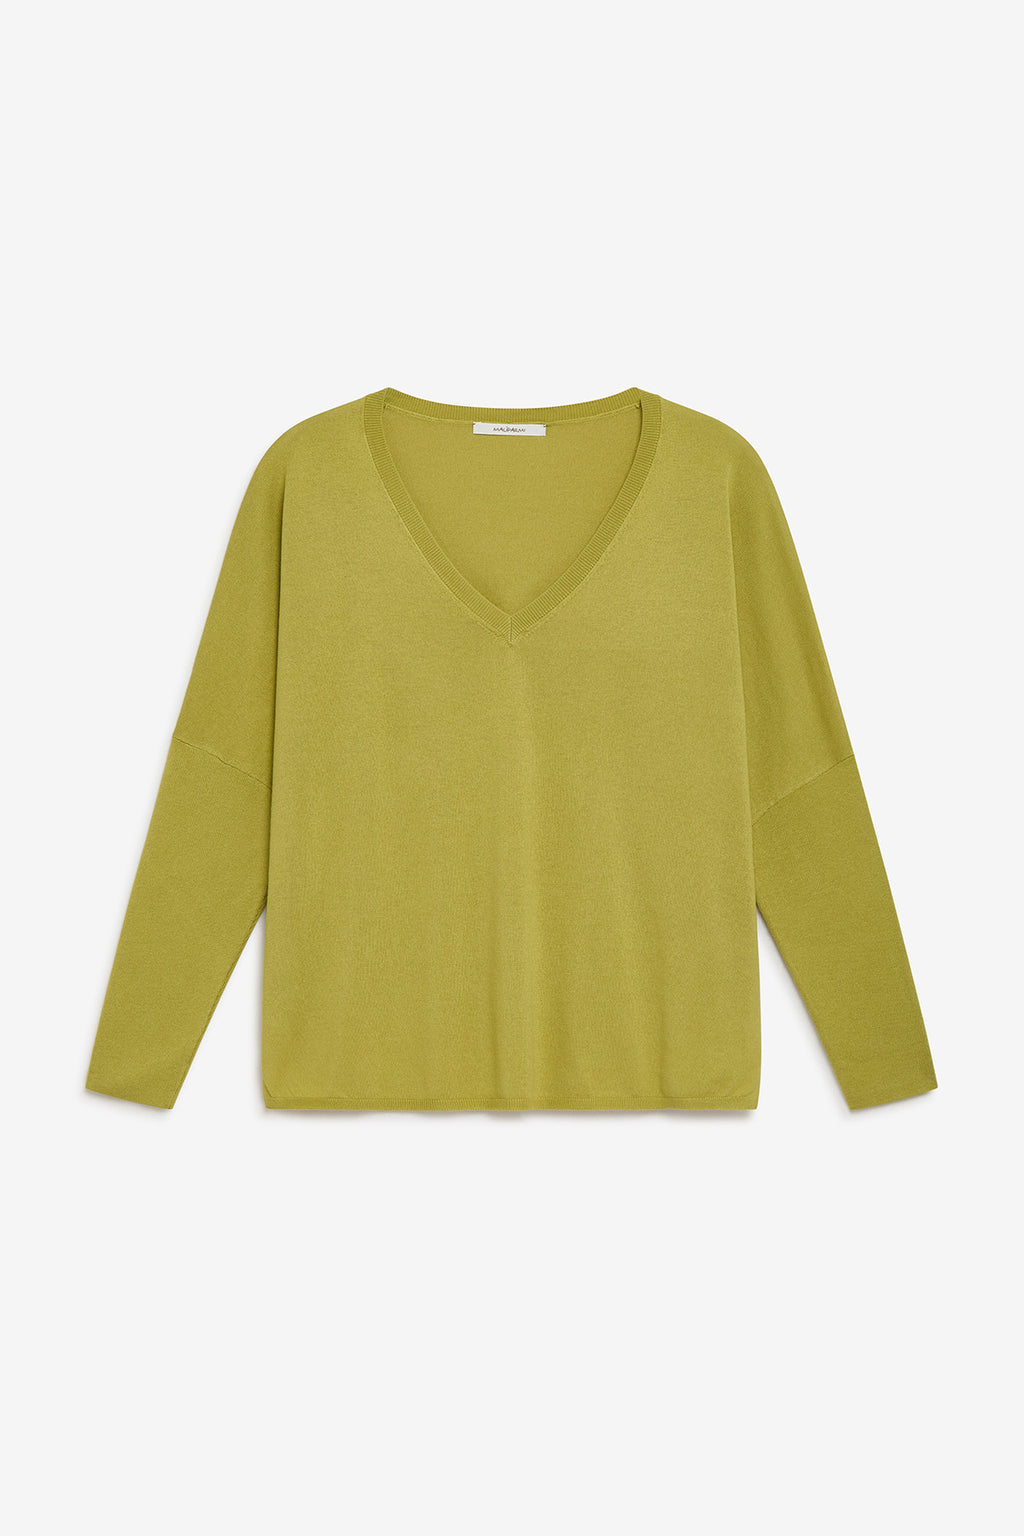 green smooth spring sweater